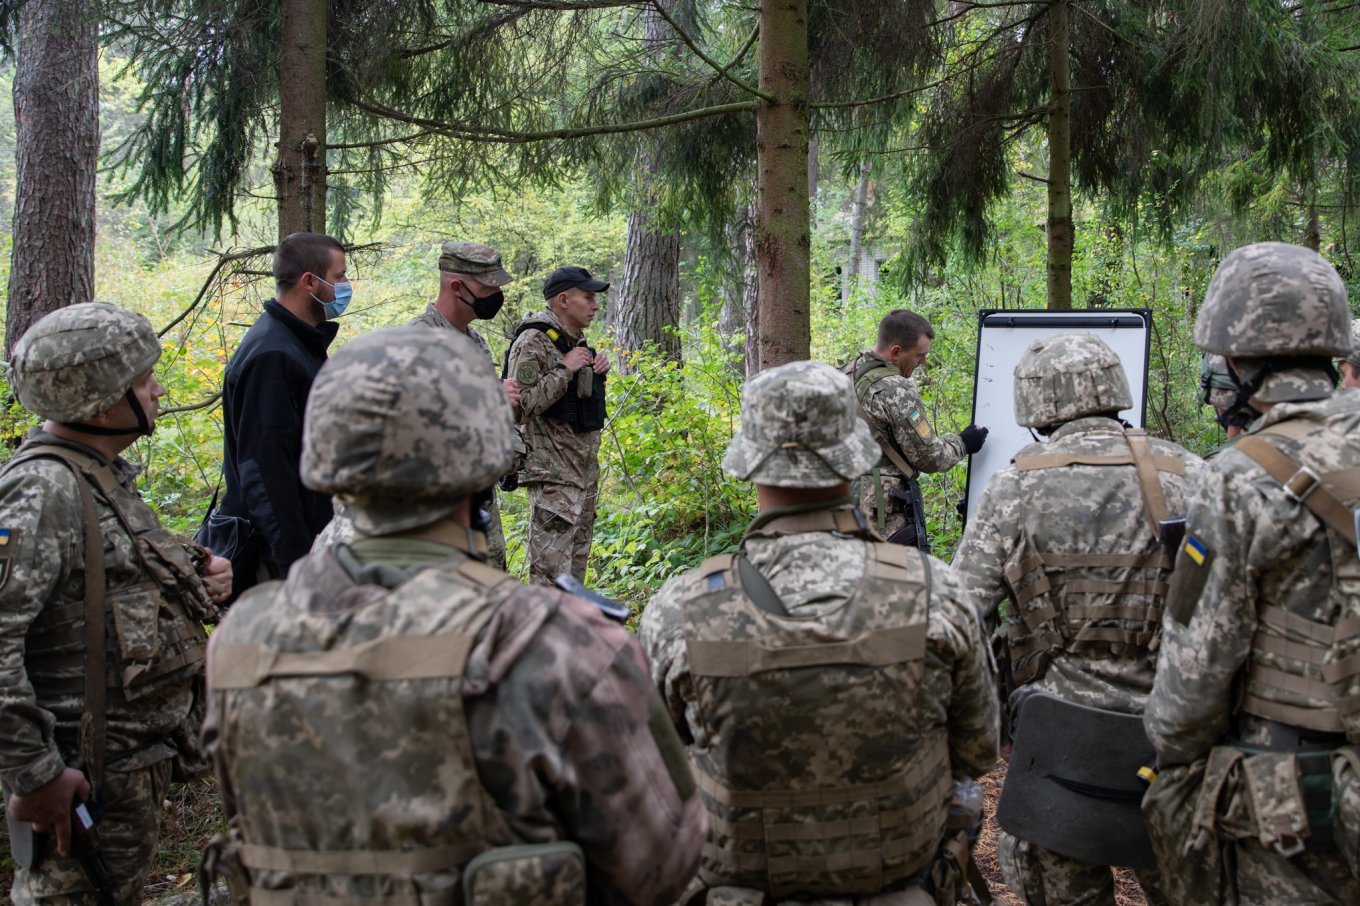 U.S Army Sgt. 1st Class Joshua Nickels observes Ukrainian Observer Controller Trainer Lt. Dmytro Suhai as his rotational training unit conducts an after action review following Military Operations on Urban Terrain at Combat Training Center-Yavoriv, Ukraine, Defense Express